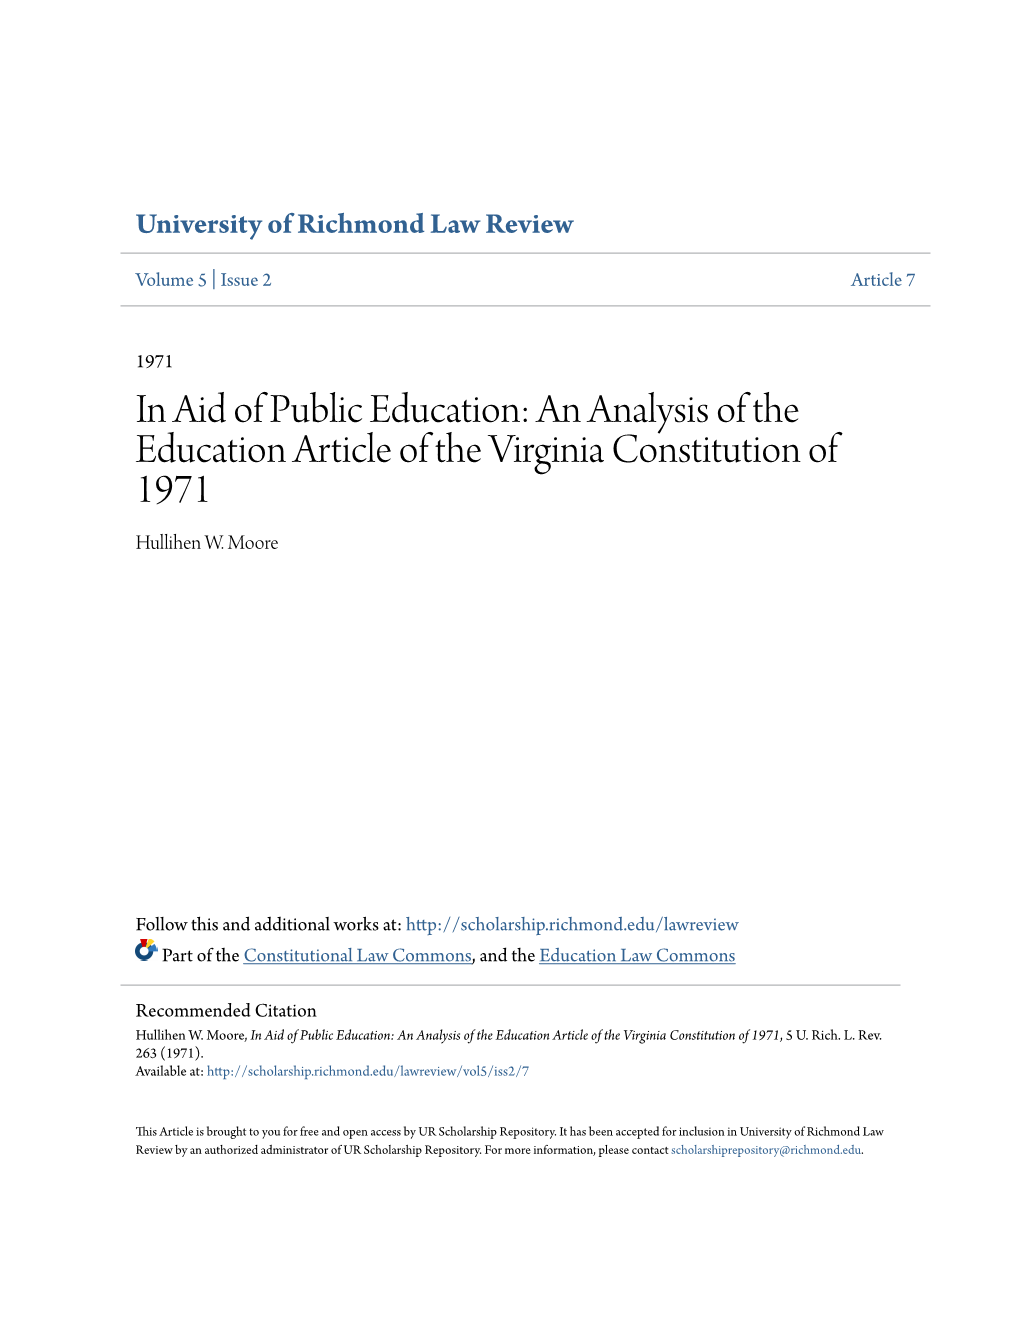 An Analysis of the Education Article of the Virginia Constitution of 1971 Hullihen W